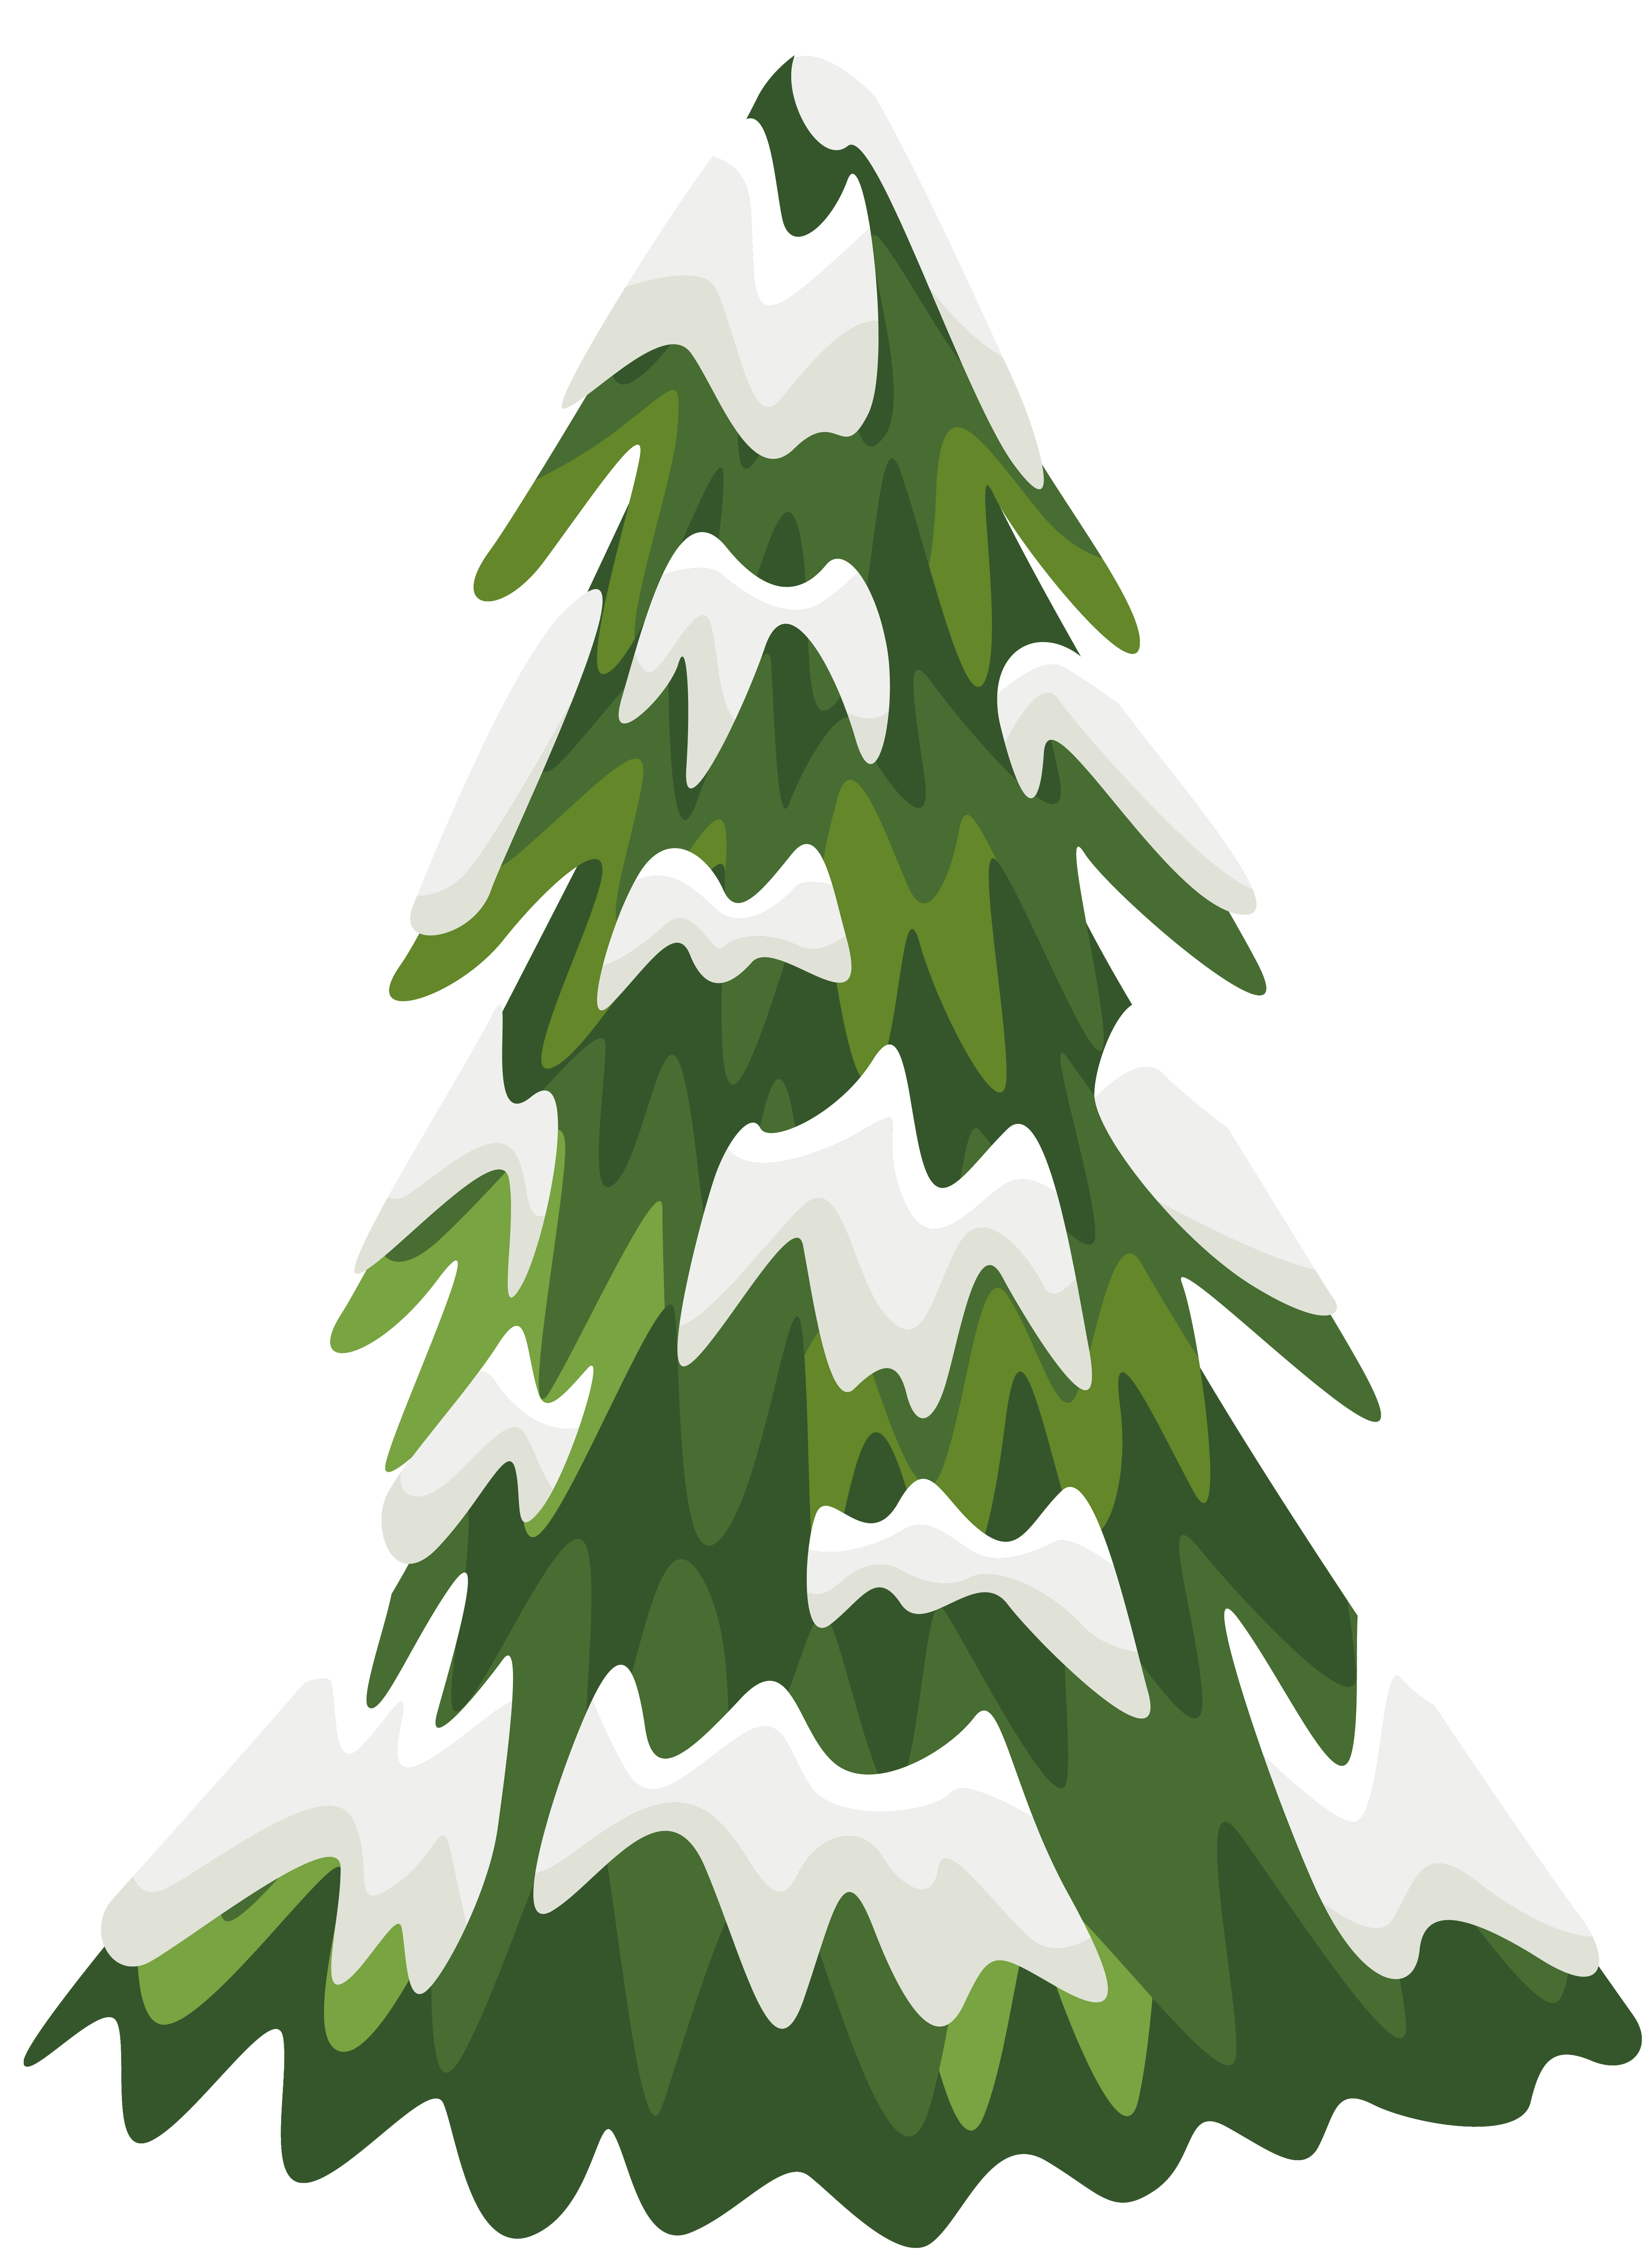 Snowy Pine Tree PNG Clipart Image | Gallery Yopriceville - High-Quality